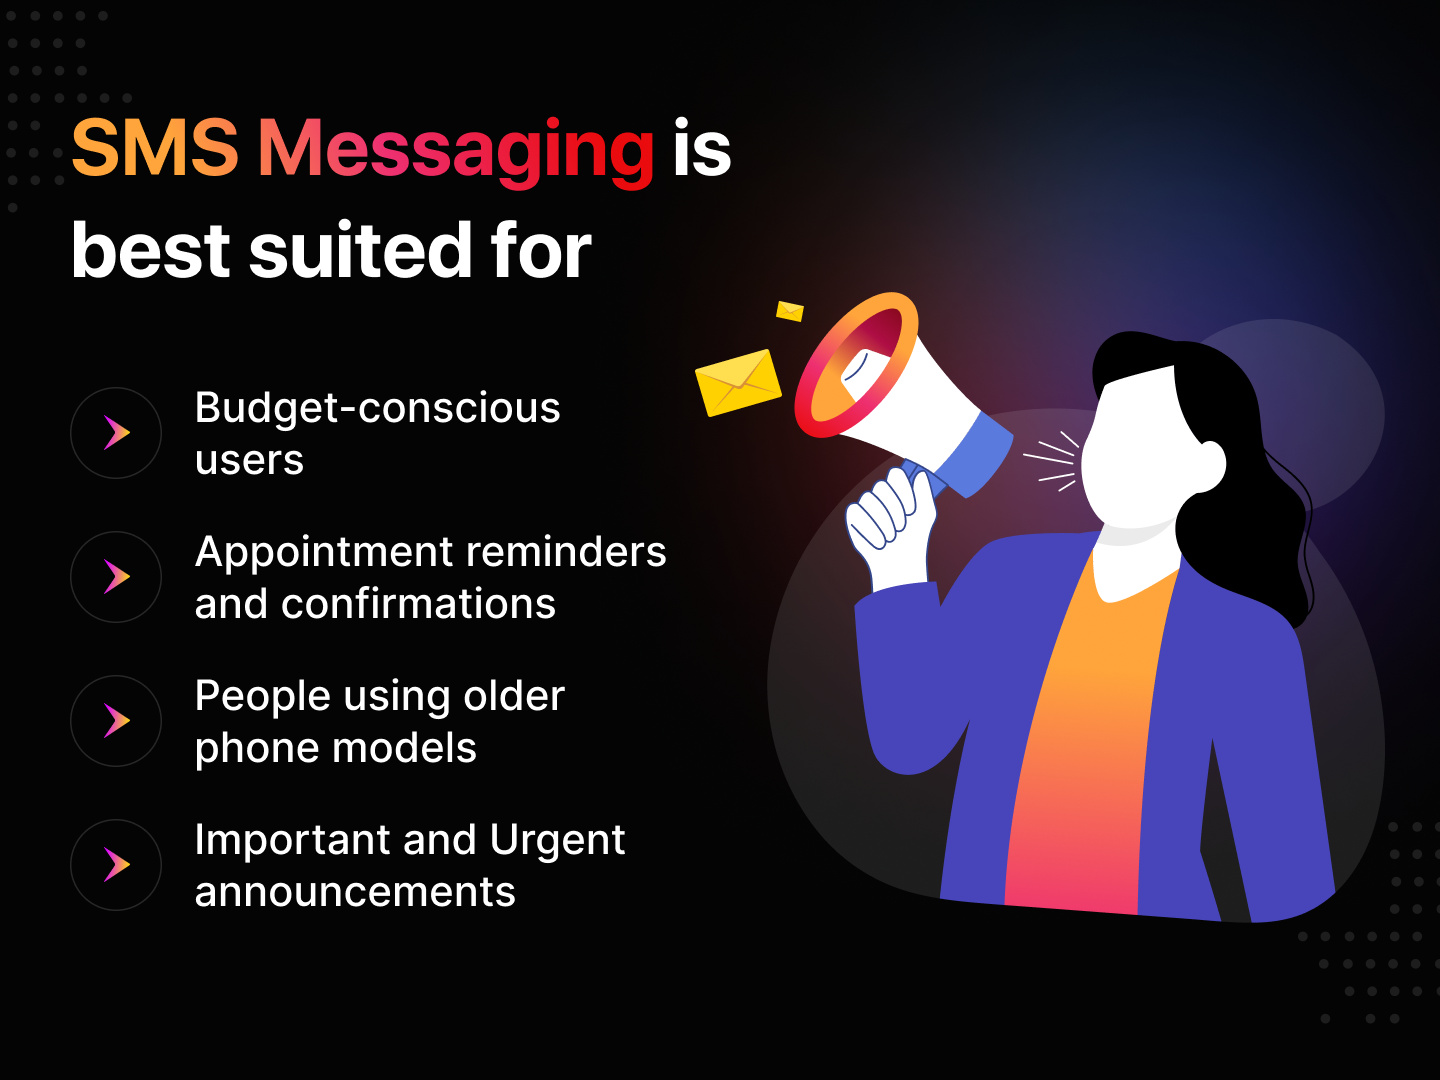 SMS vs MMS: How do they differ?